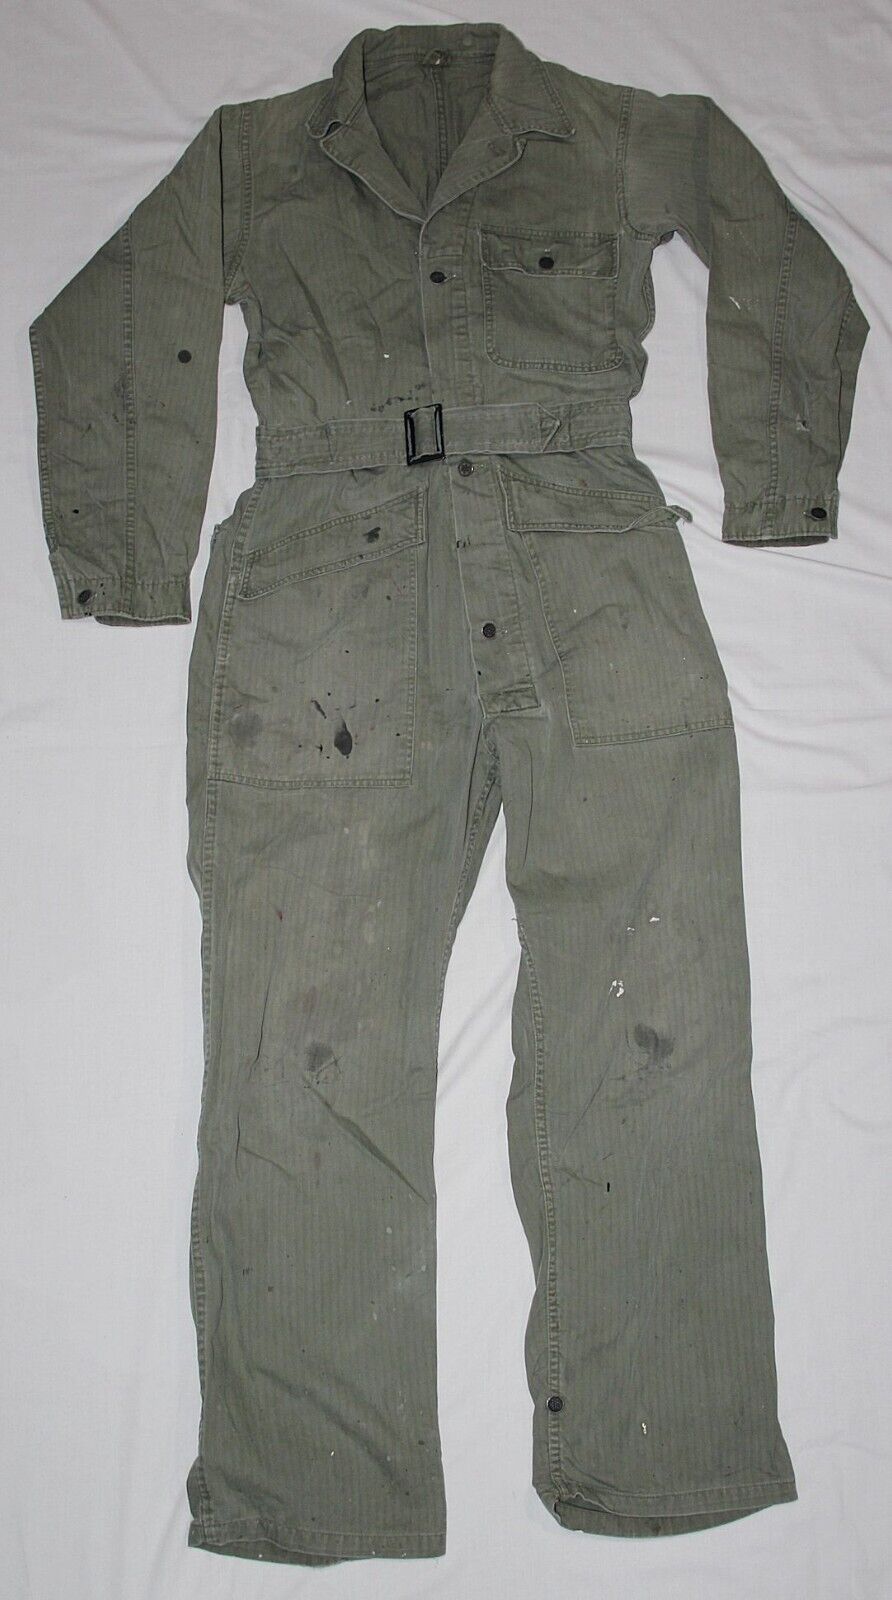 ORIGINAL WWII M-1943 HBT ONE PIECE COVERALLS WITH ATTACHED BELT